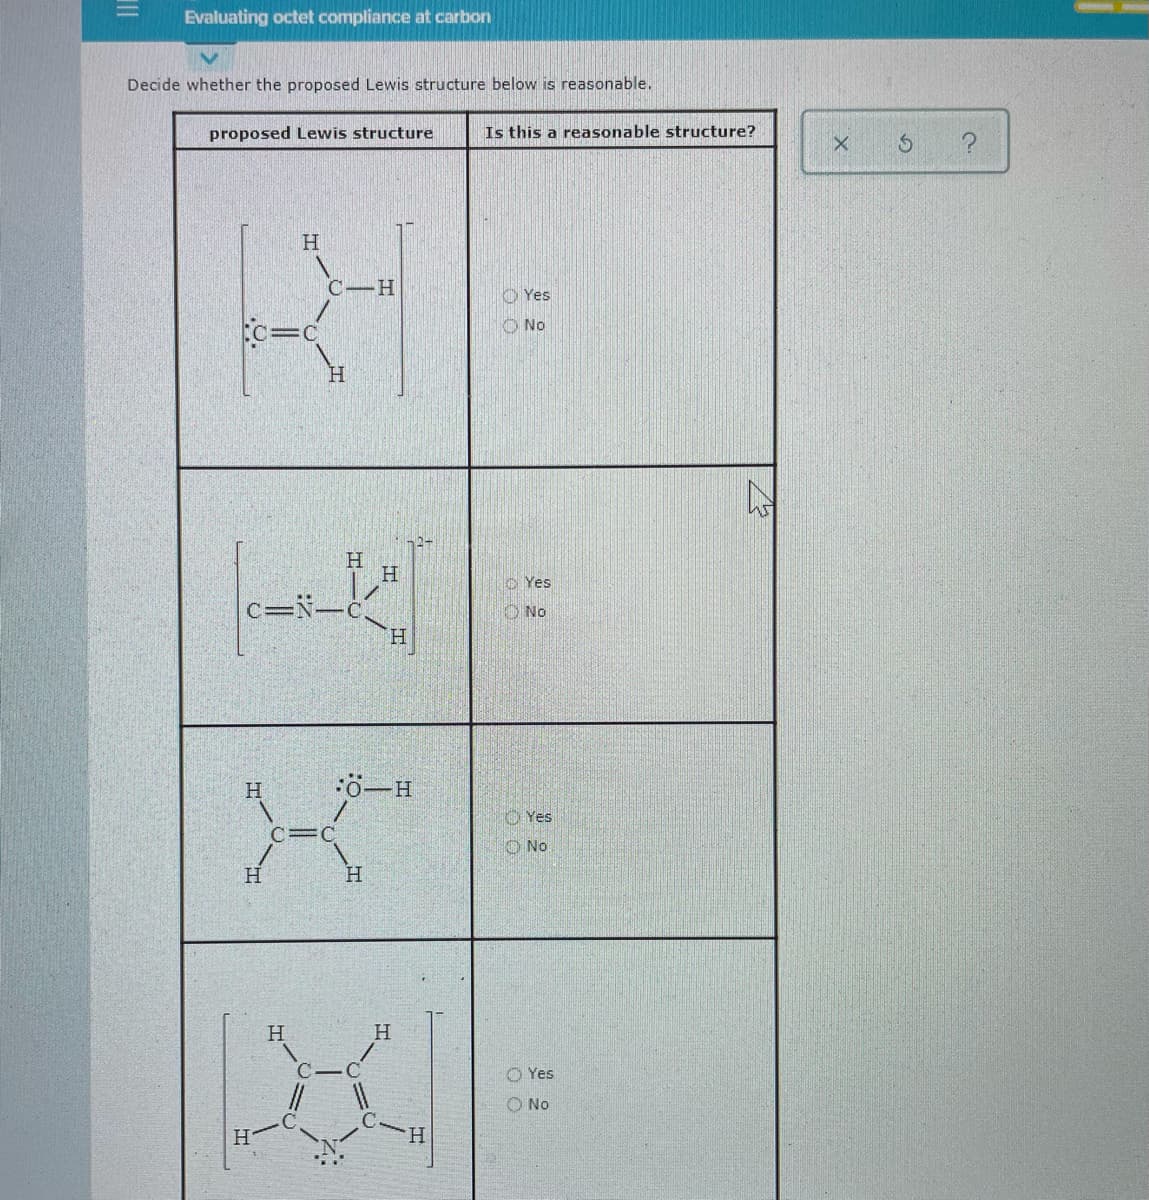 %3D
Evaluating octet compliance at carbon
Decide whether the proposed Lewis structure below is reasonable.
proposed Lewis structure
Is this a reasonable structure?
H.
C-H
O Yes
%3D
O No
H.
H.
o Yes
c=N-c
H.
ONo
H
:ö-H
Yes
C=C
O No
H.
H
H
O Yes
O No
H.
H.
